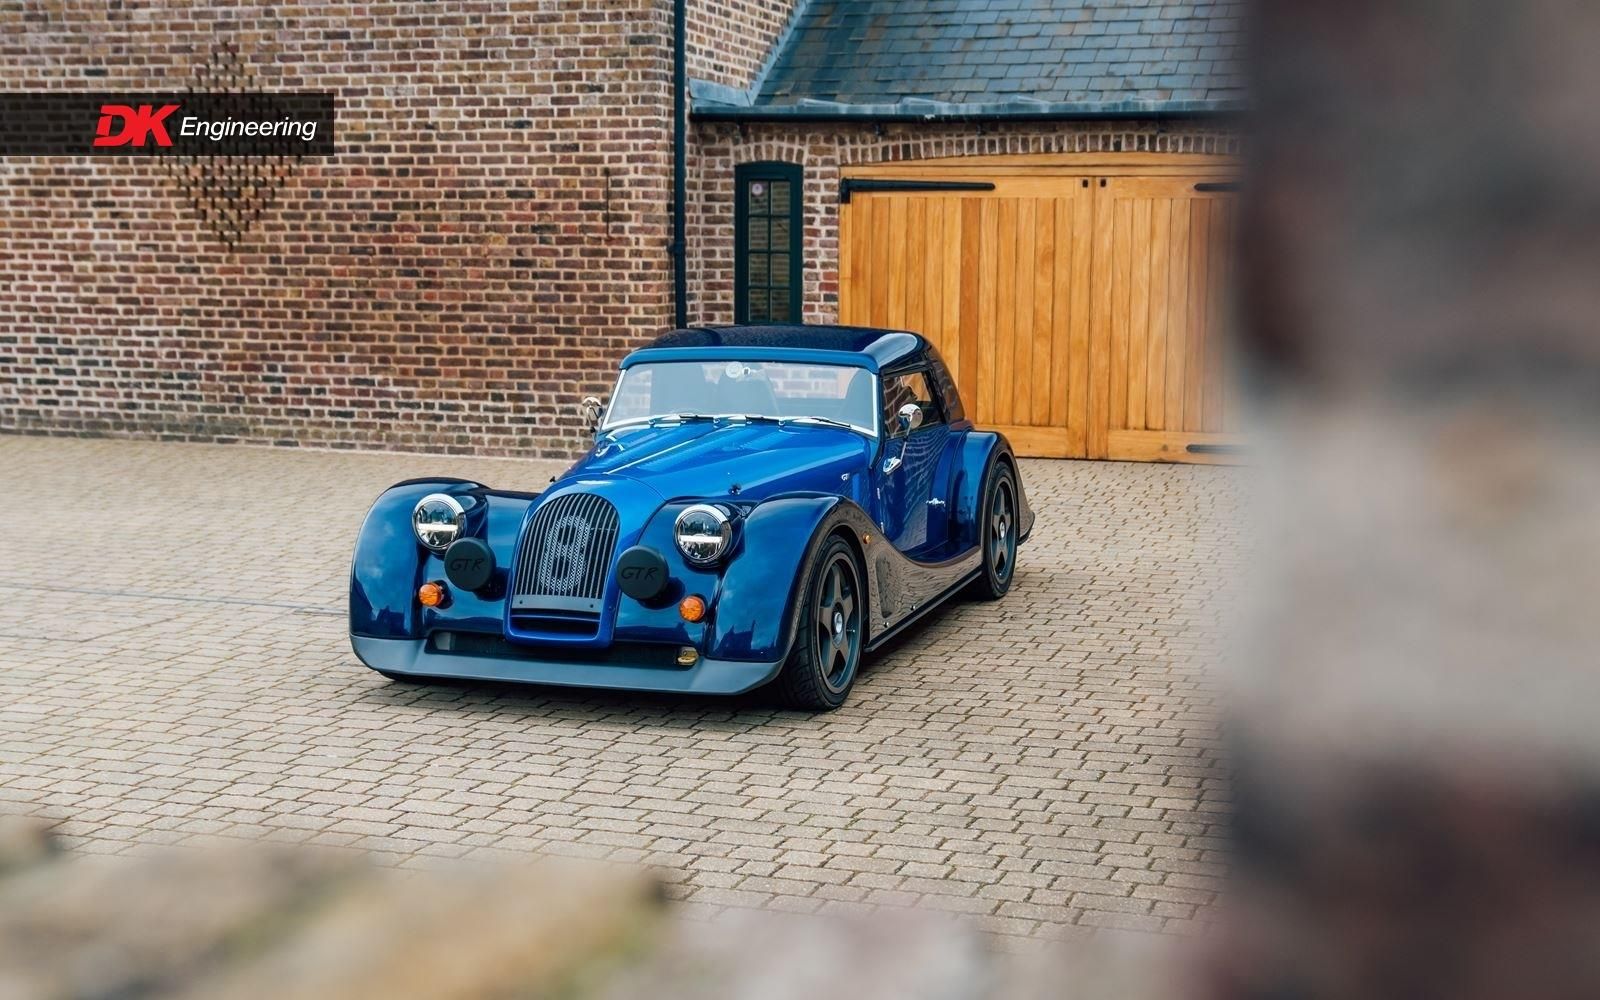 Live Auction - Morgan Plus 8 GTR - One of 9 Examples Built - One of Just 3 in RHD [DK1971]